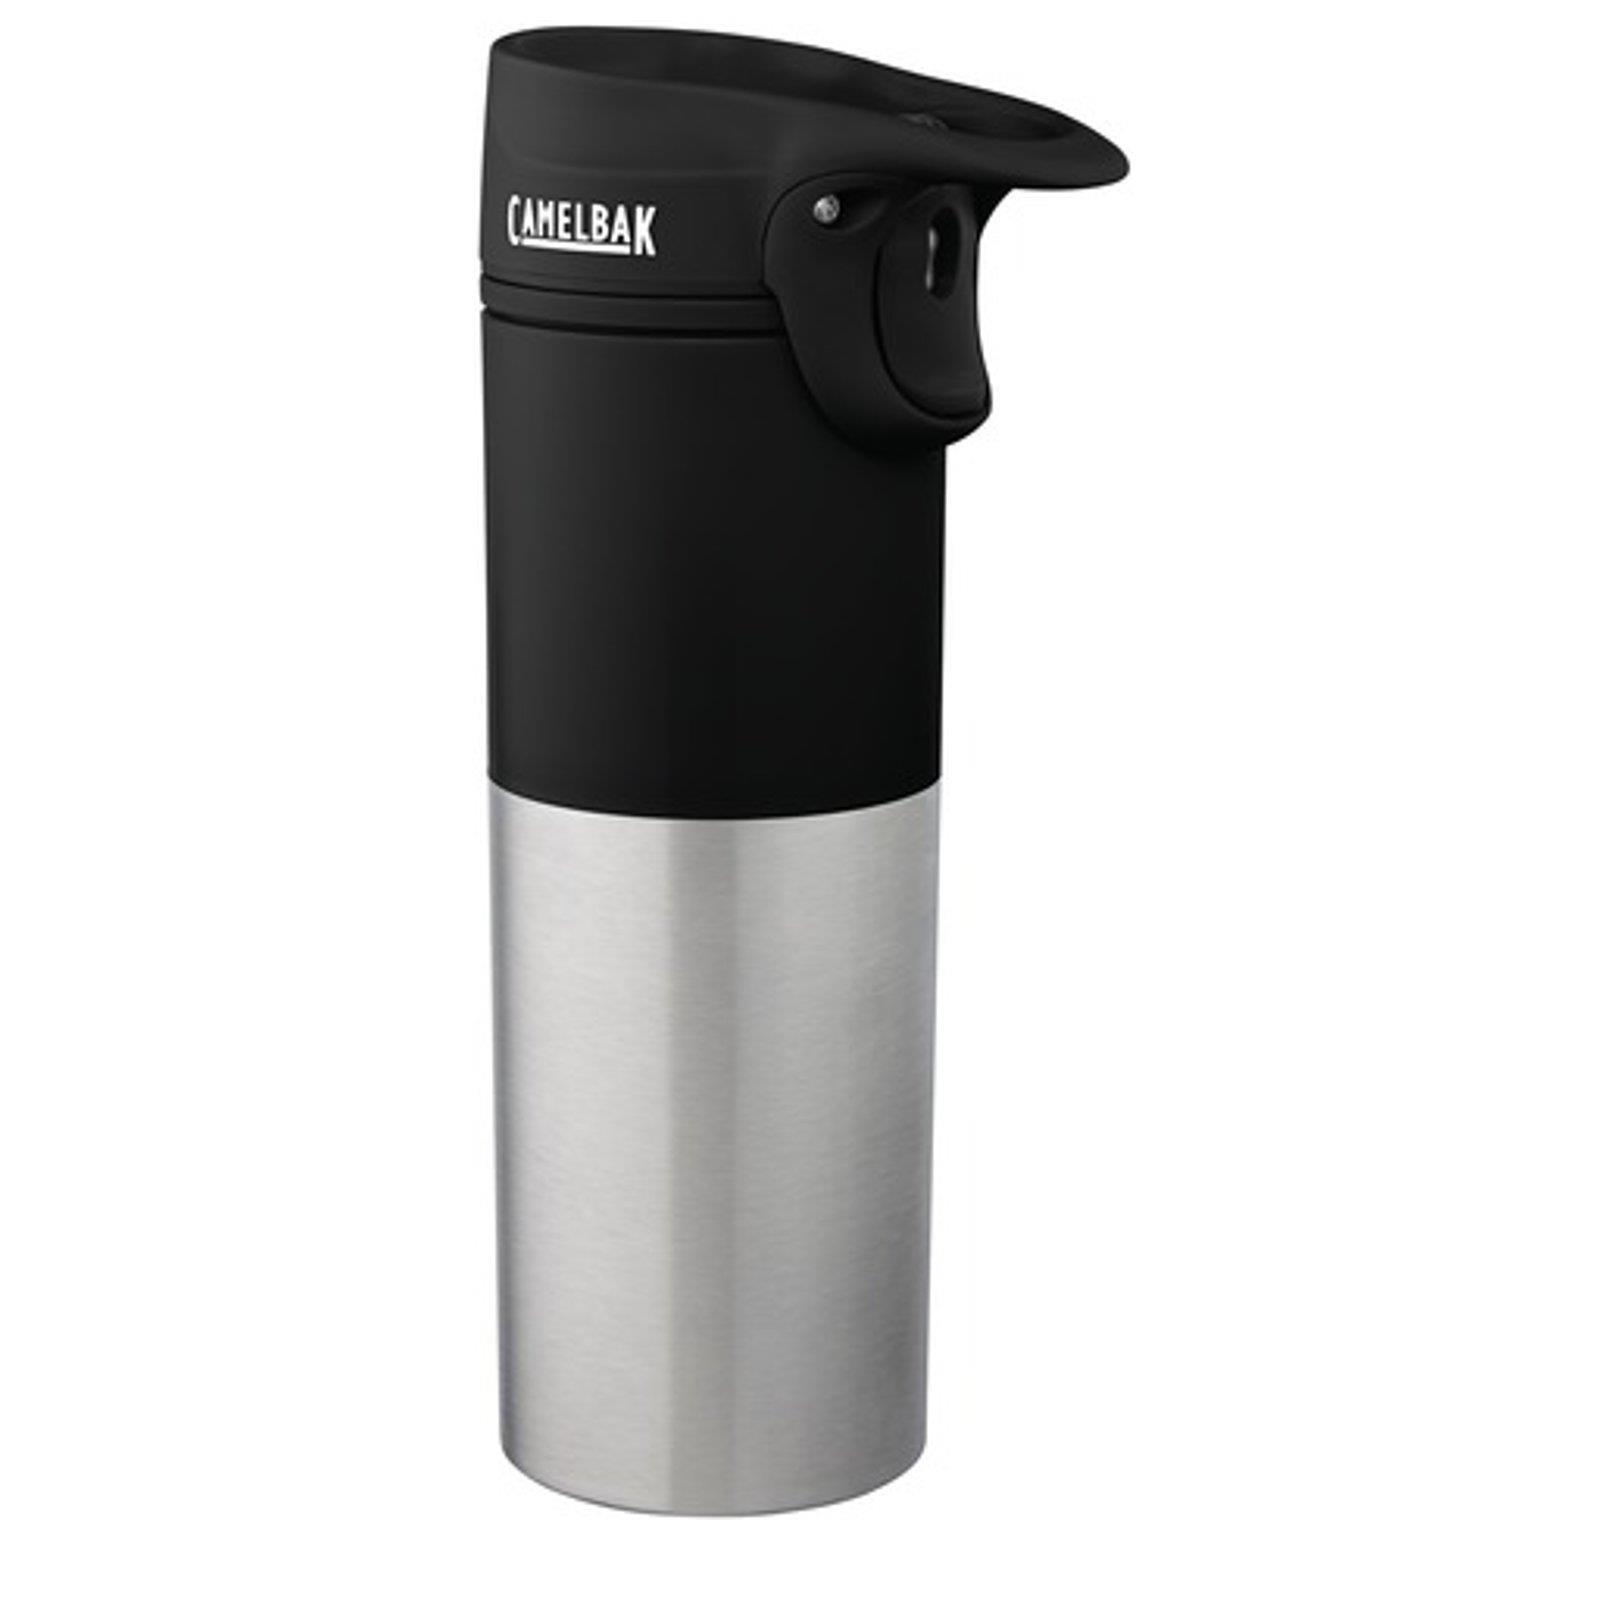 Camelbak Thermo Trinkflasche Forge Silber 355 ml Isolierflasche Kaffee Teebecher 